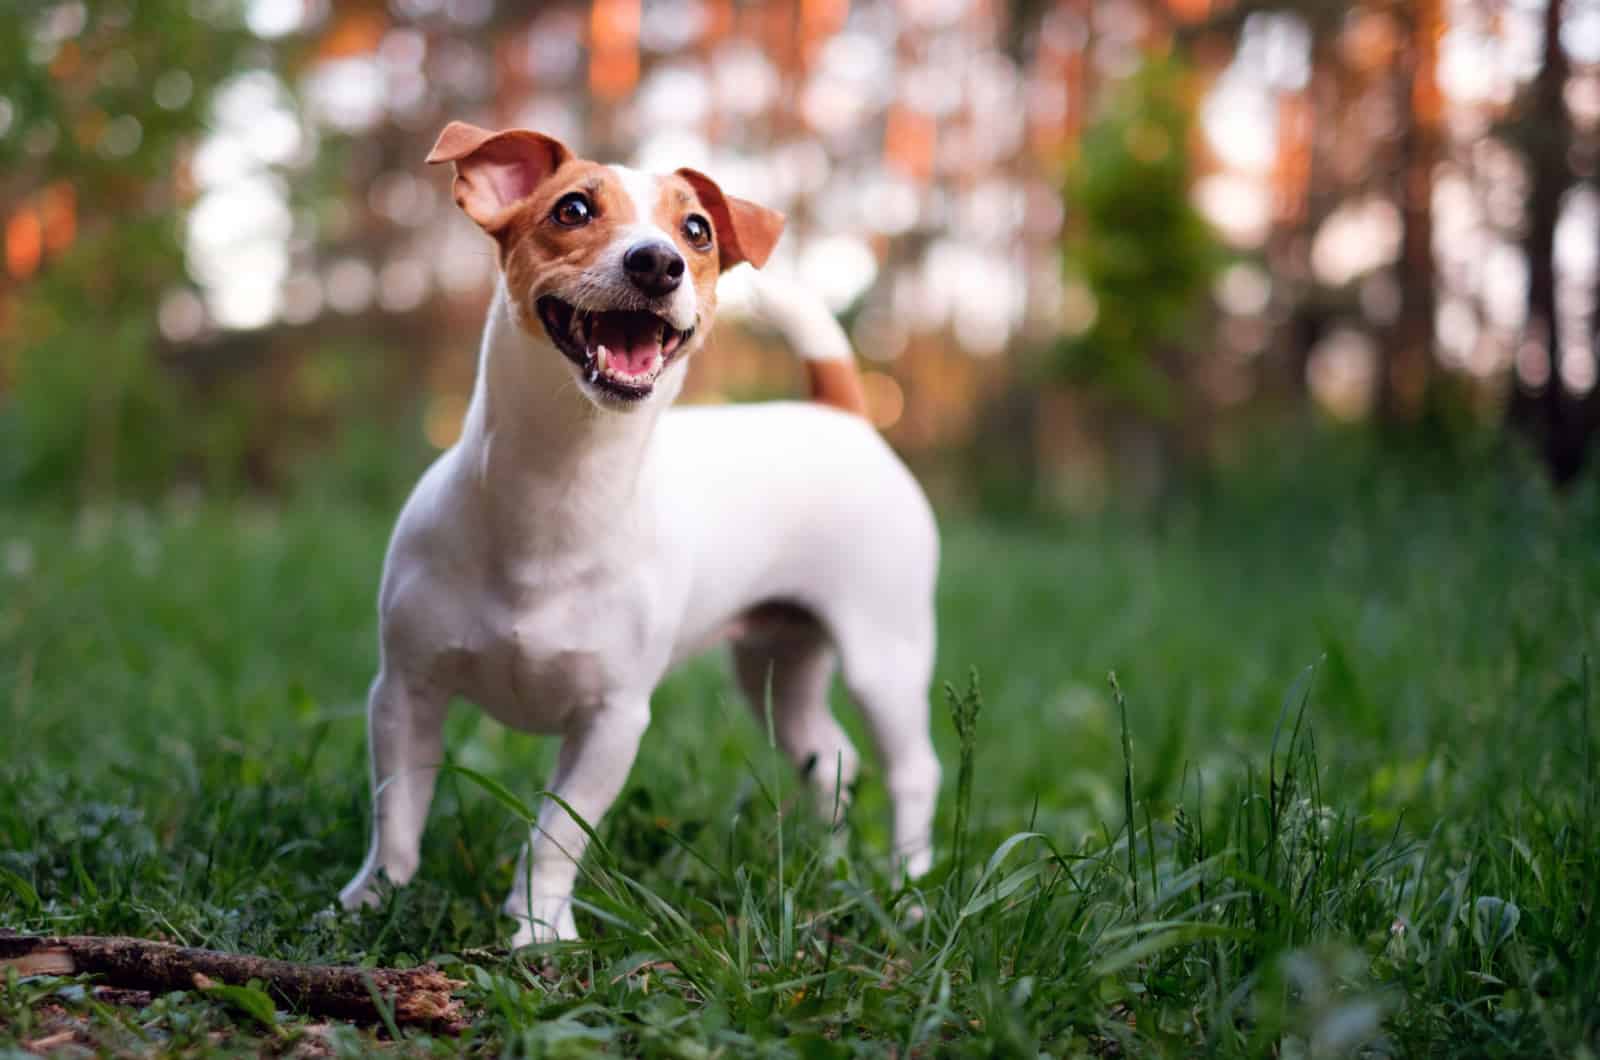 chestnut and white jack russell